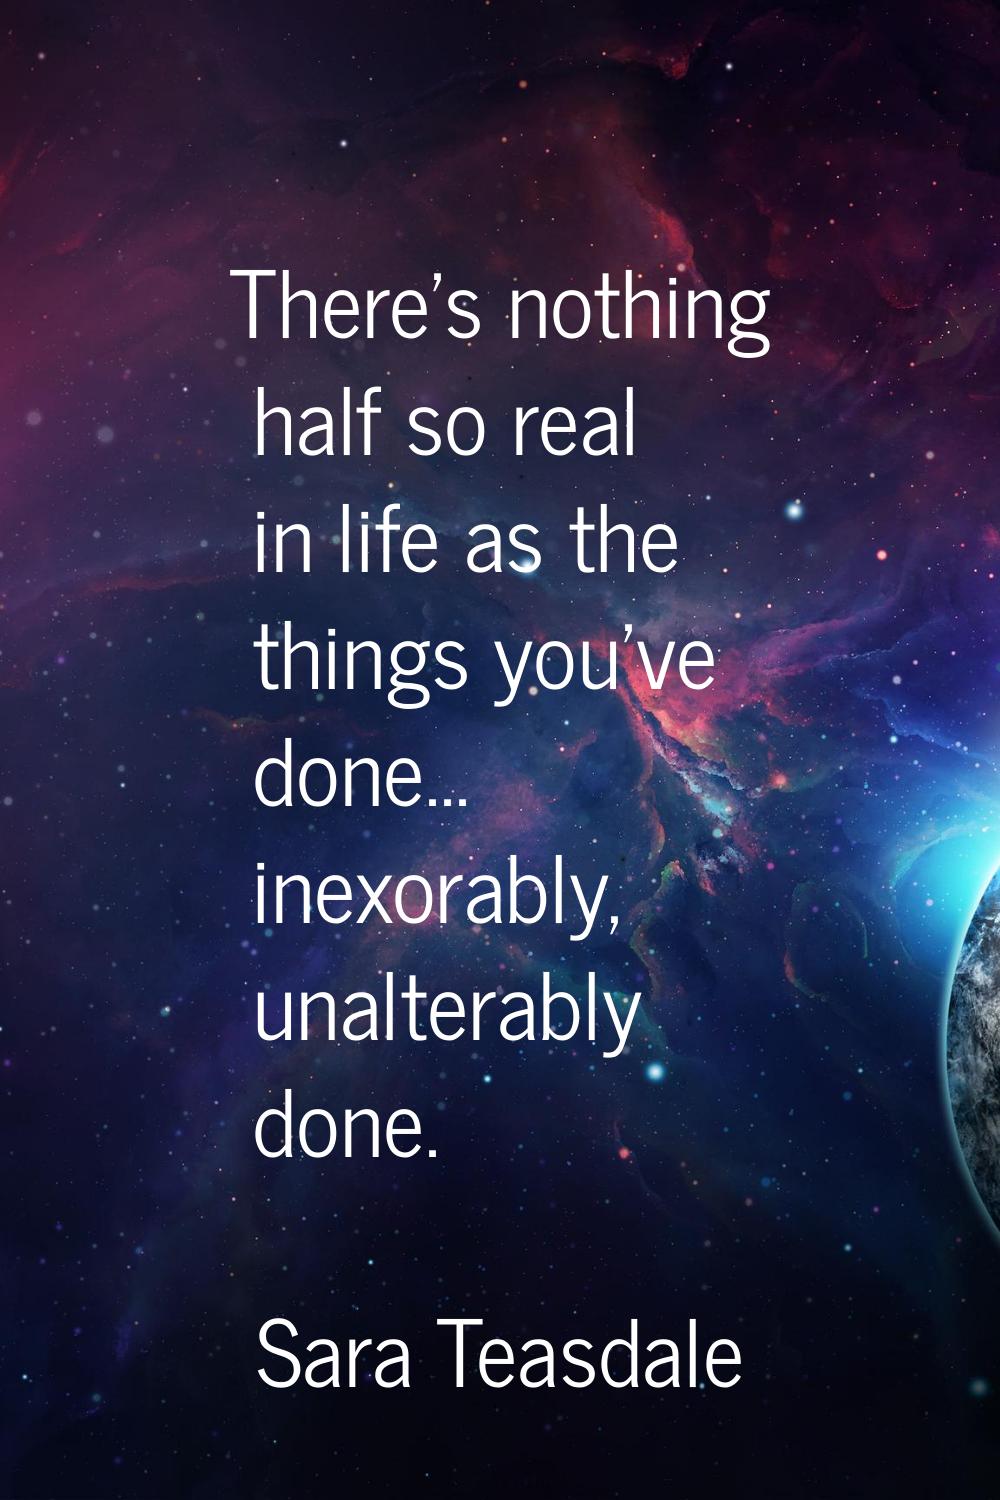 There's nothing half so real in life as the things you've done... inexorably, unalterably done.